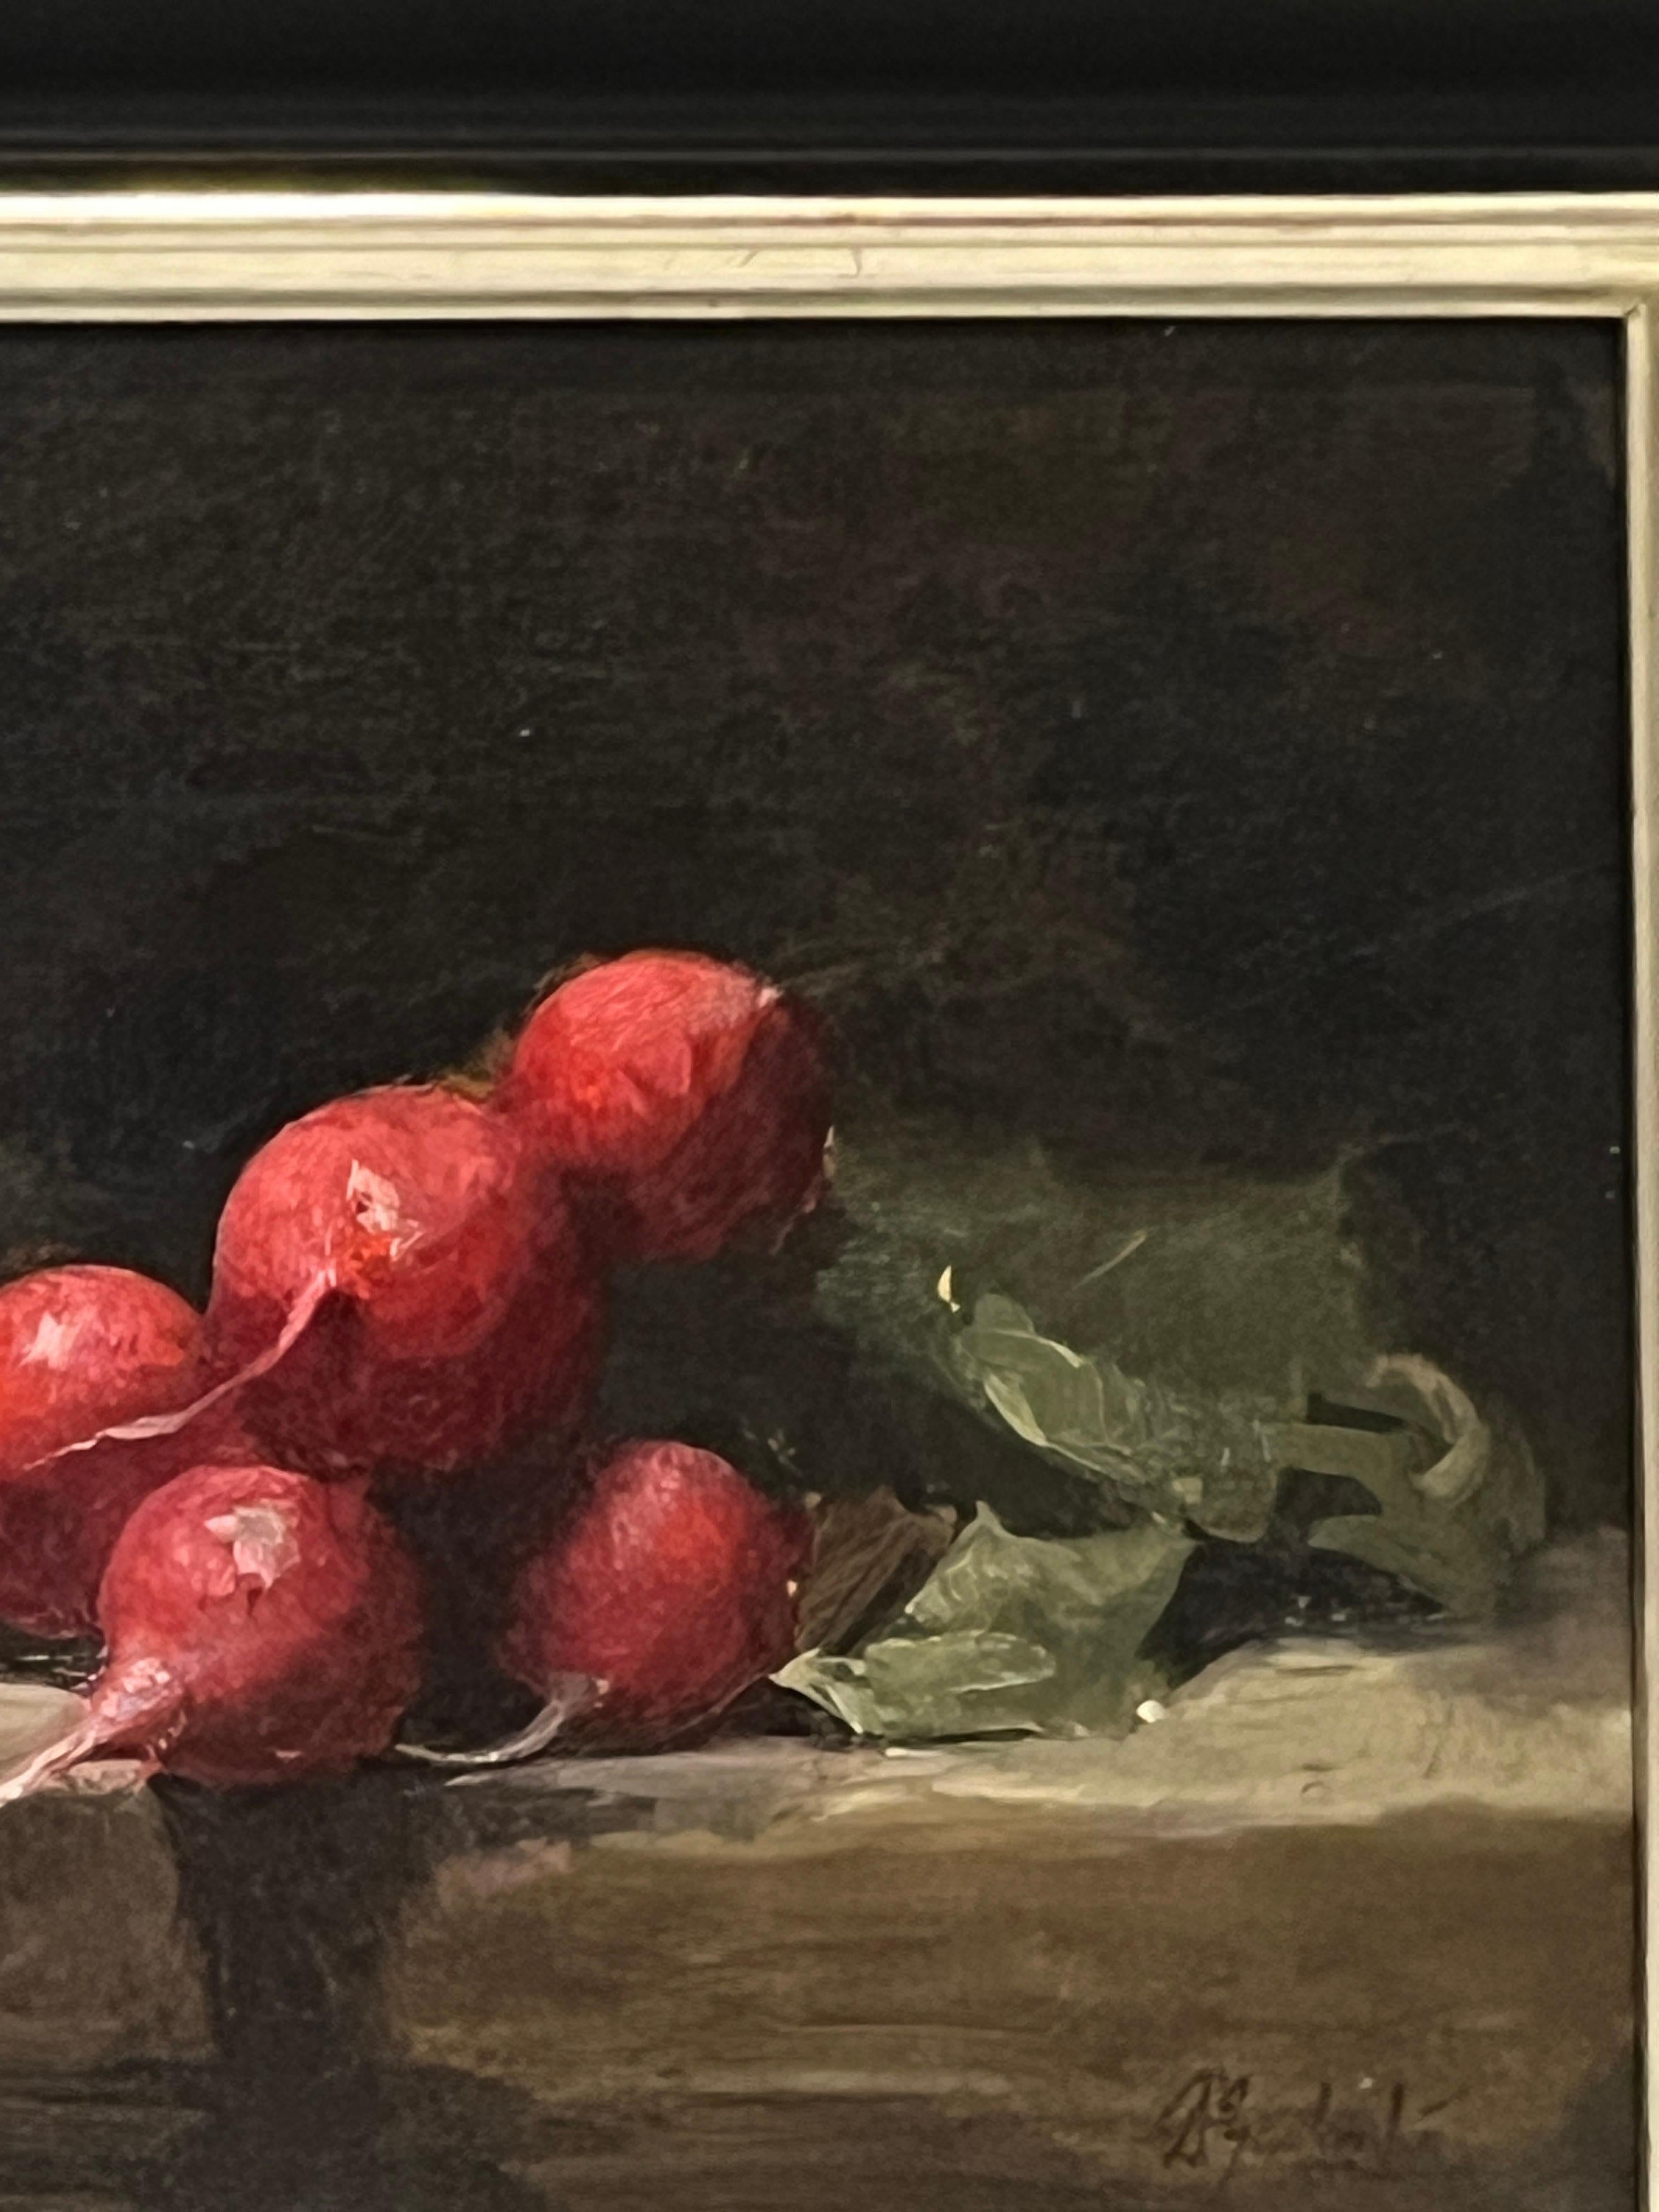 Dale Zinkowski is a master of still life. His work, reminiscent of Golden Age Dutch still life painting, glows with light and subtle, quiet beauty. This original oil painting shows a bunch of beautifully ripe radishes on a dark ground so that their